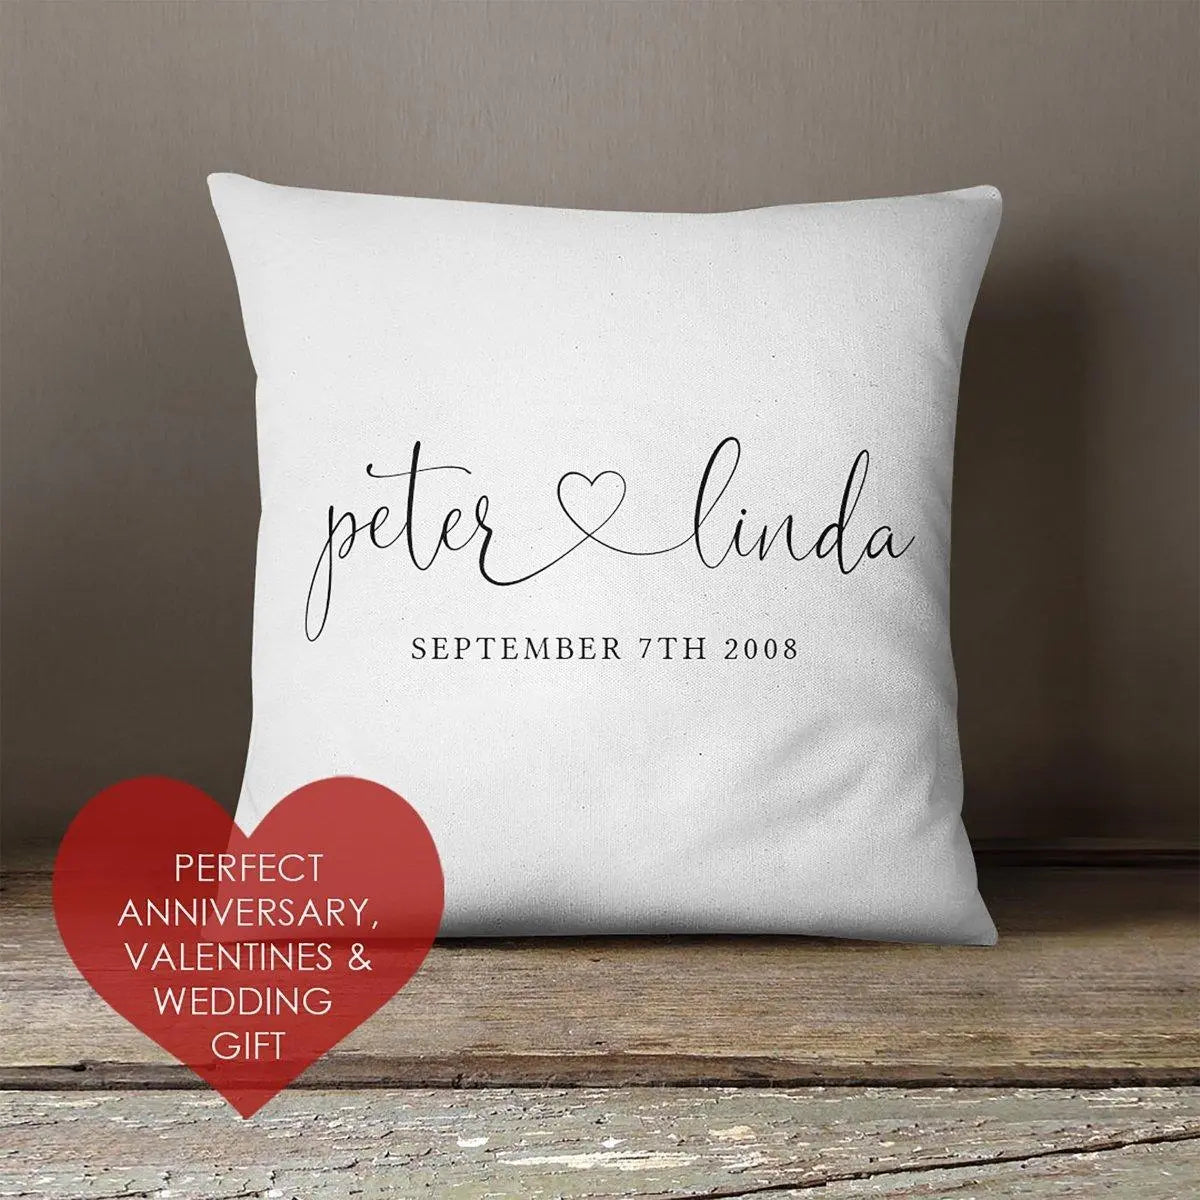 Personalised Custom Name and Date Couple Cushion, Valentines Gift, Anniversary Gift, Honeymoon and Newlywed Cushion, Minimal and Modern Gift - Amy Lucy